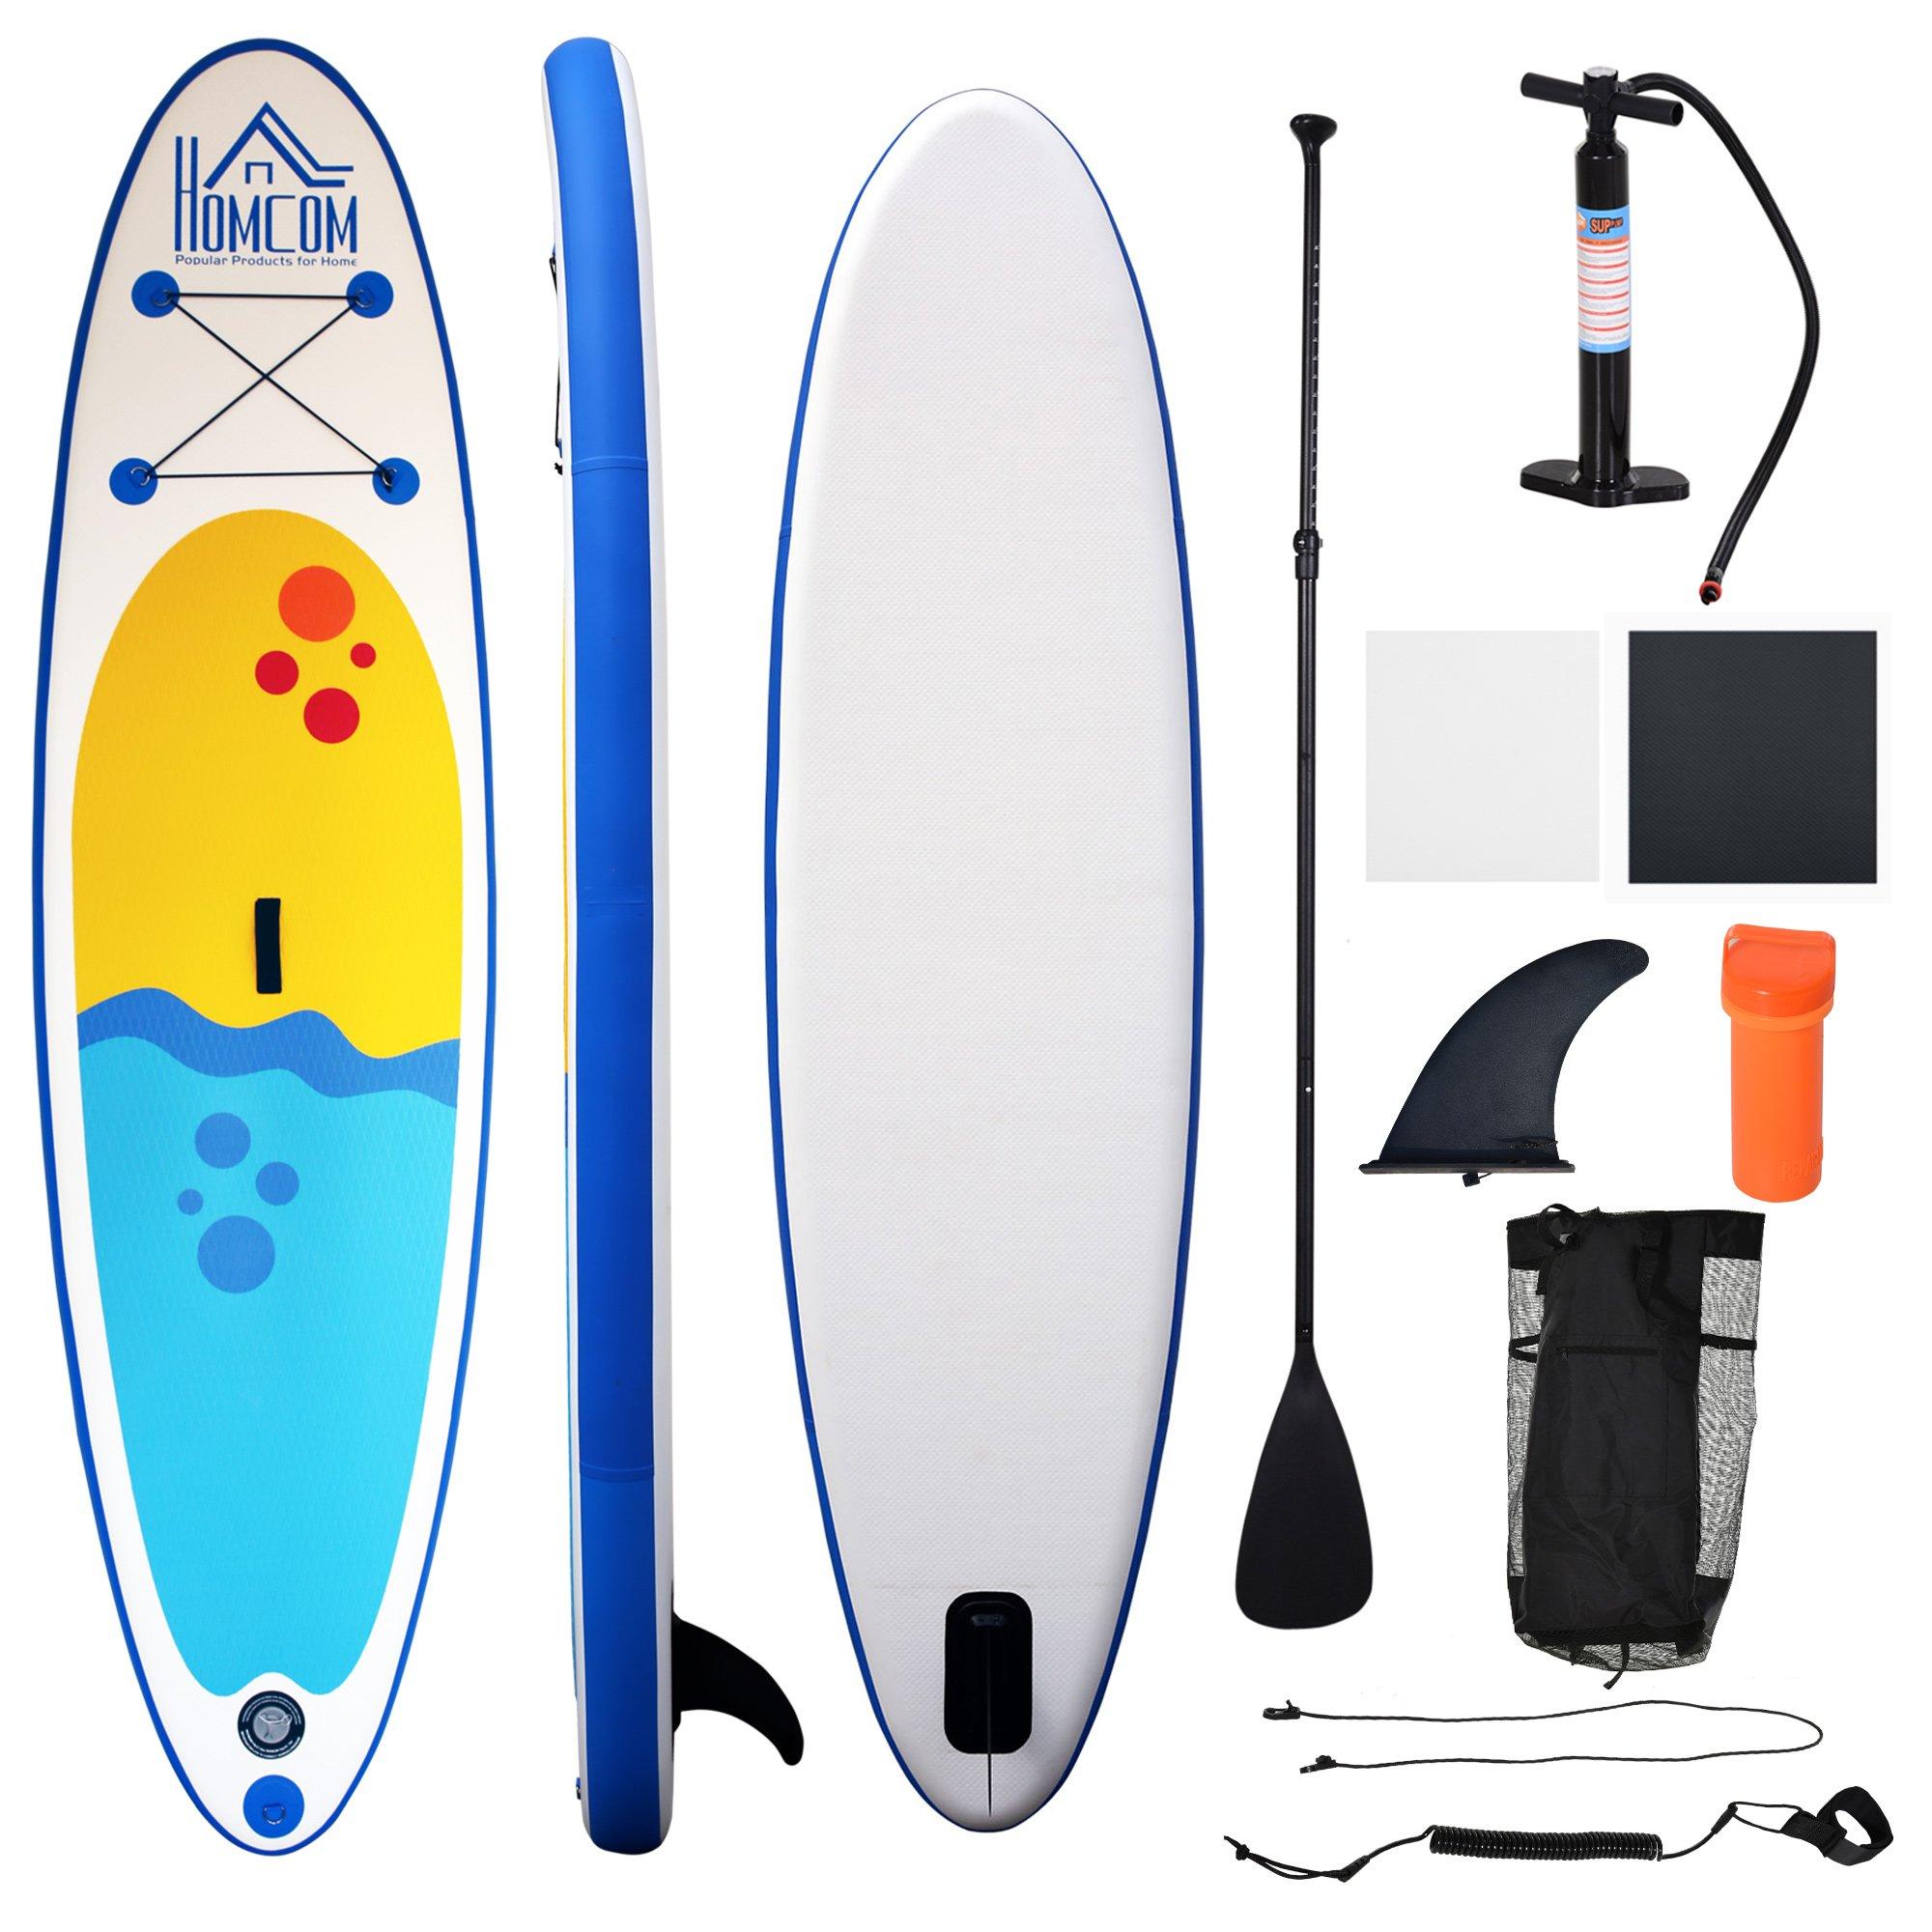 10ft Inflatable Surf Boards with Paddle, Fix Bag, Air Pump, Fin, Backpack -Blue